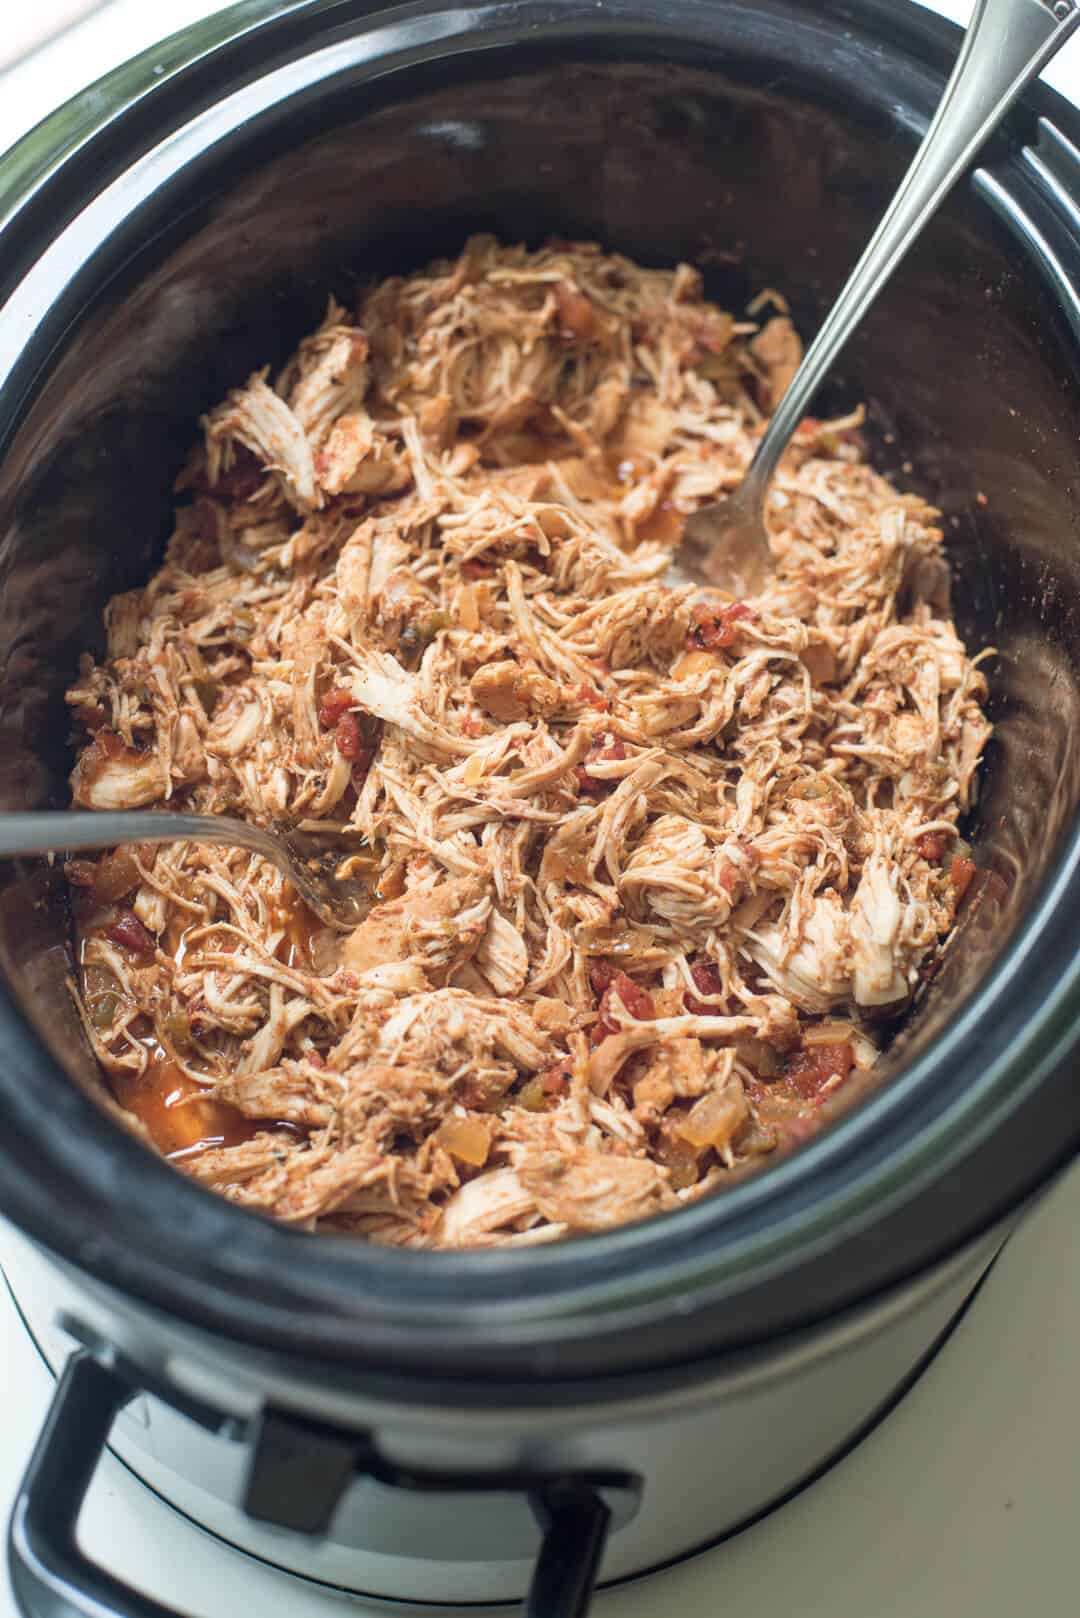 Cooked chicken being shredded with two forks in a slow cooker.